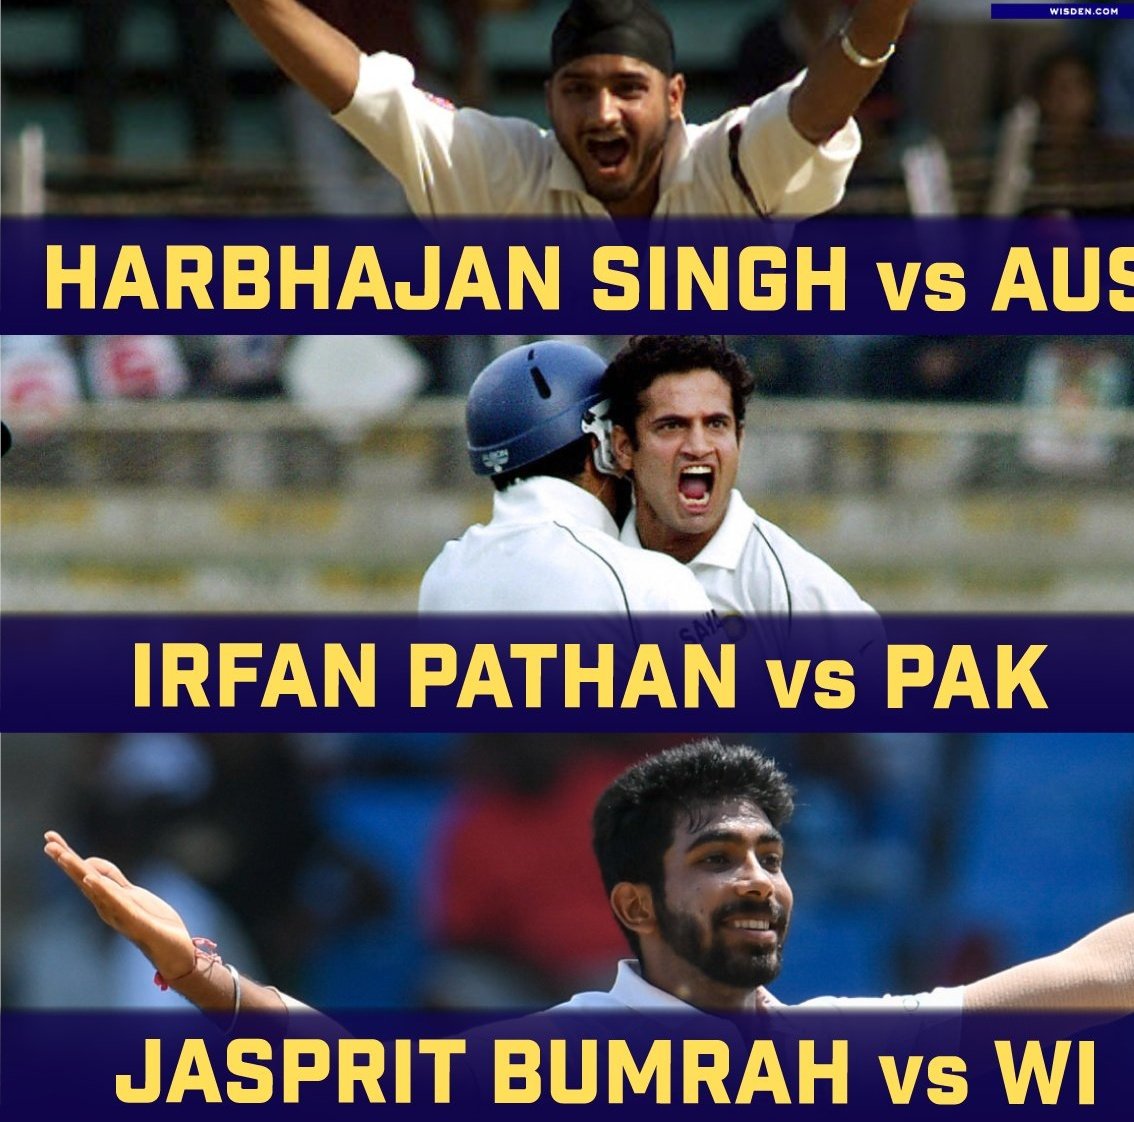 Darren Bravo ☝️
Shamarh Brooks ☝️
Roston Chase ☝️

#OnThisDay in 2019, Jasprit Bumrah became the third Indian bowler to register a hat-trick in the longest format of the game 🔥

#JaspritBumrah #India #WIvsIND #Tests #Cricket #OTD